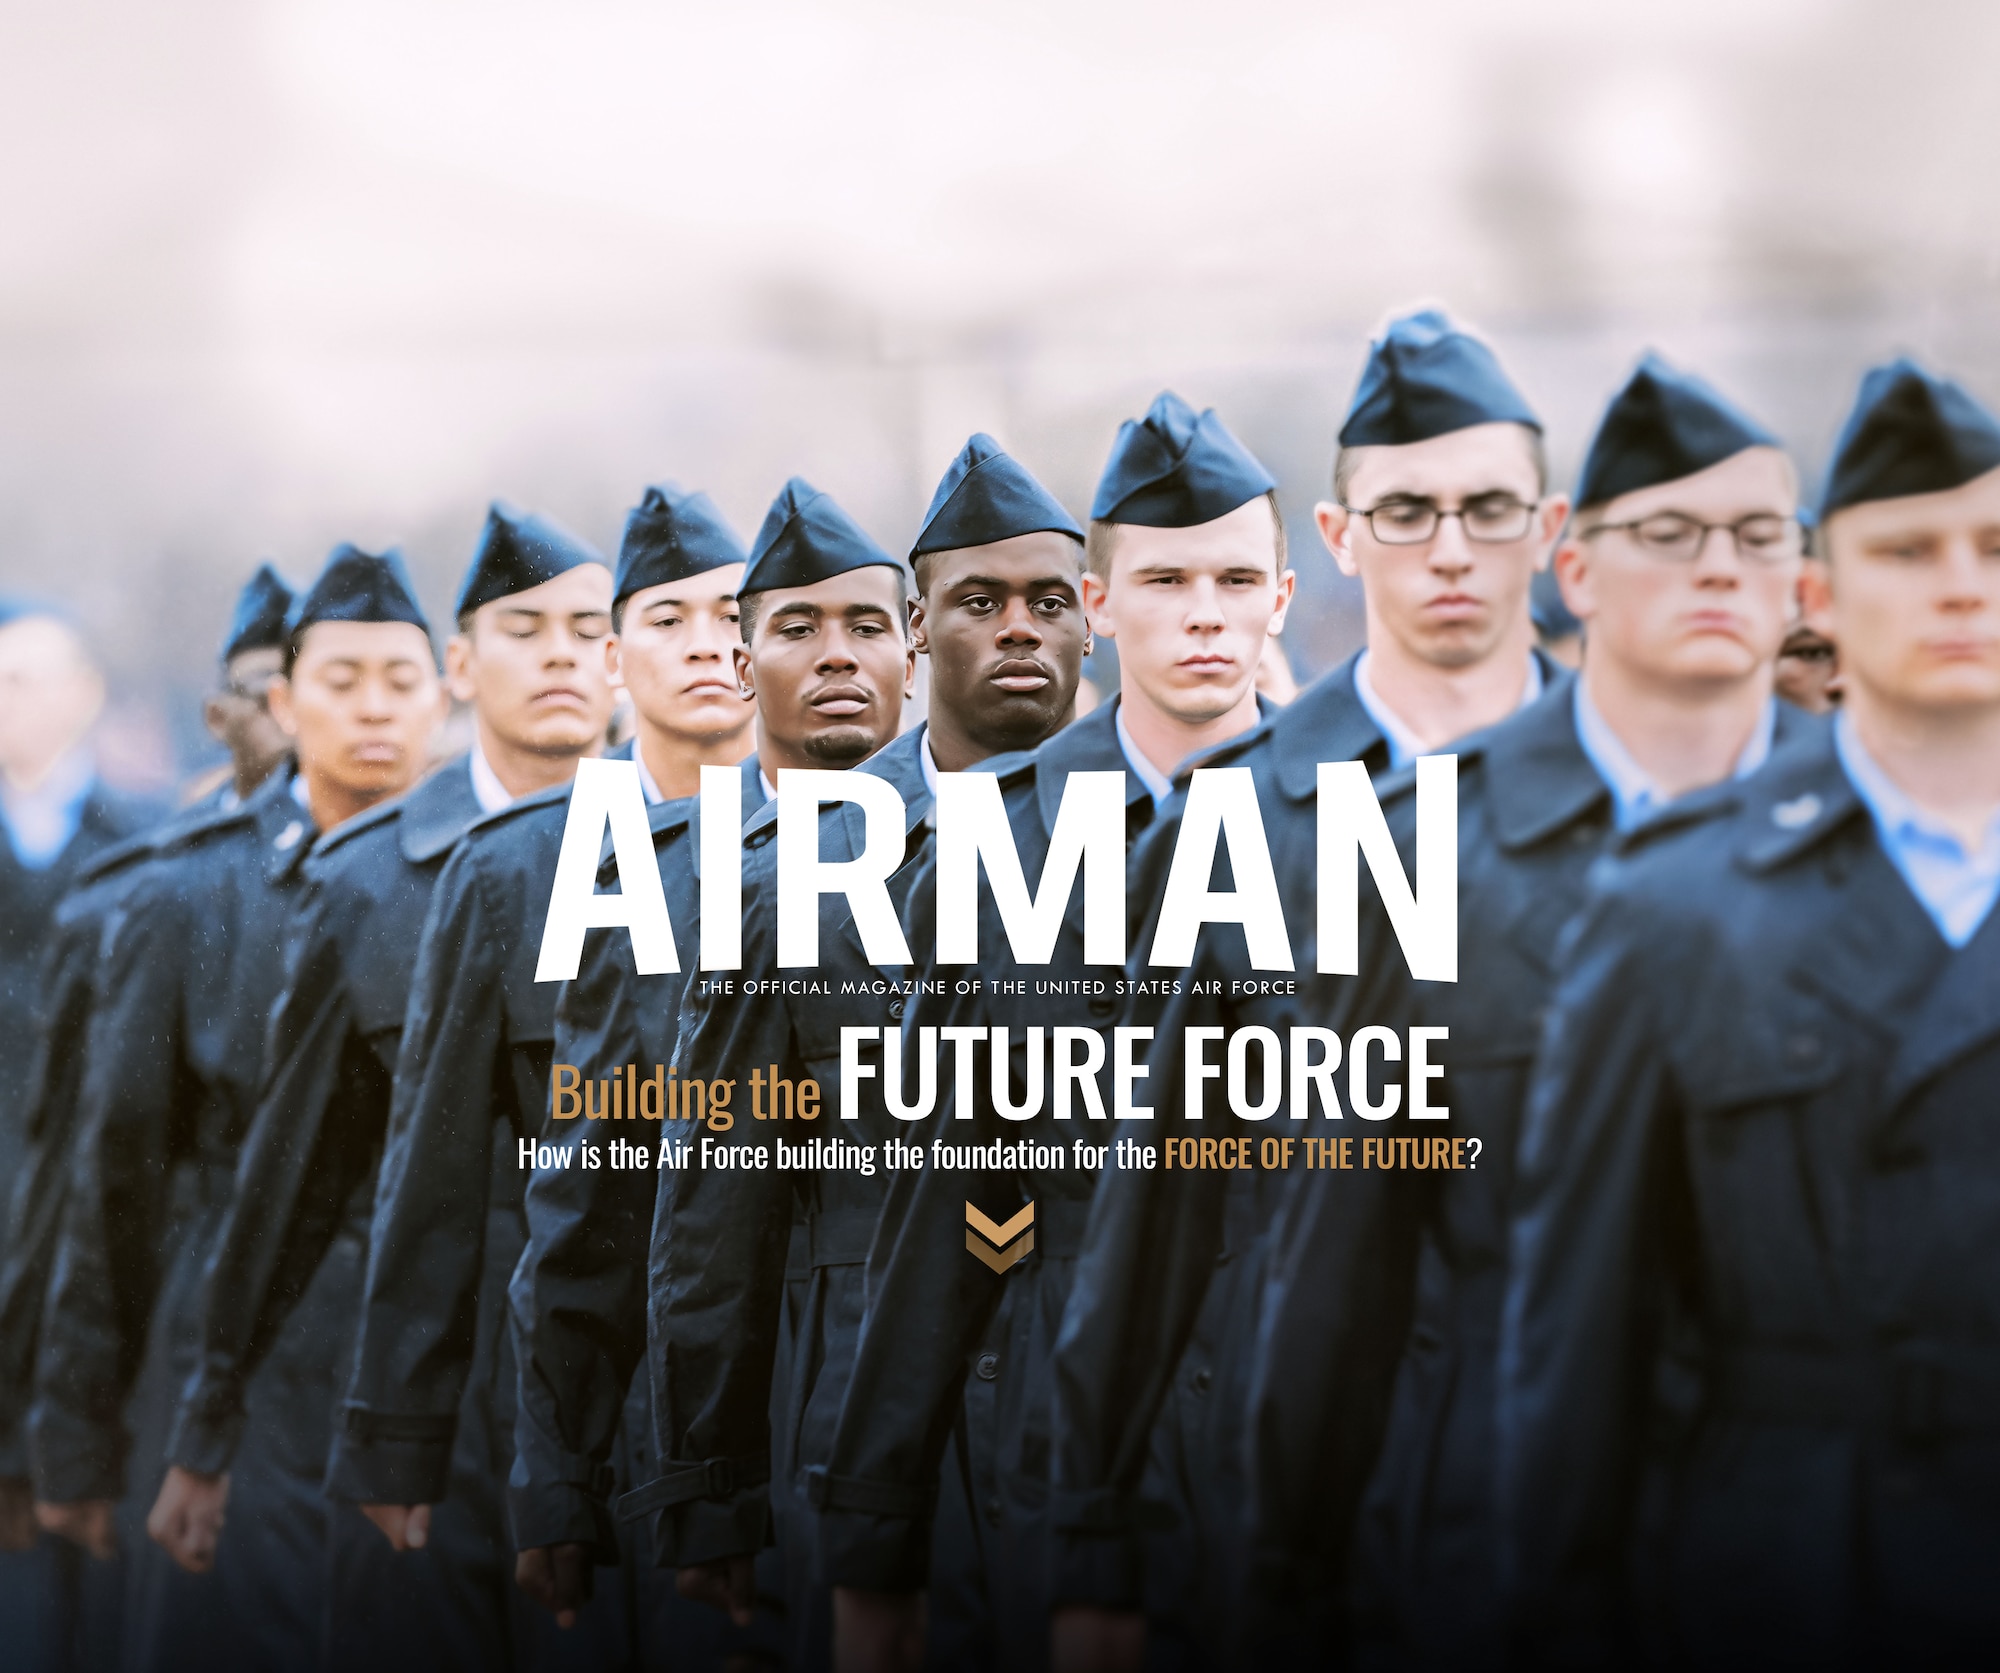 Airman Magazine: Building the Future Force